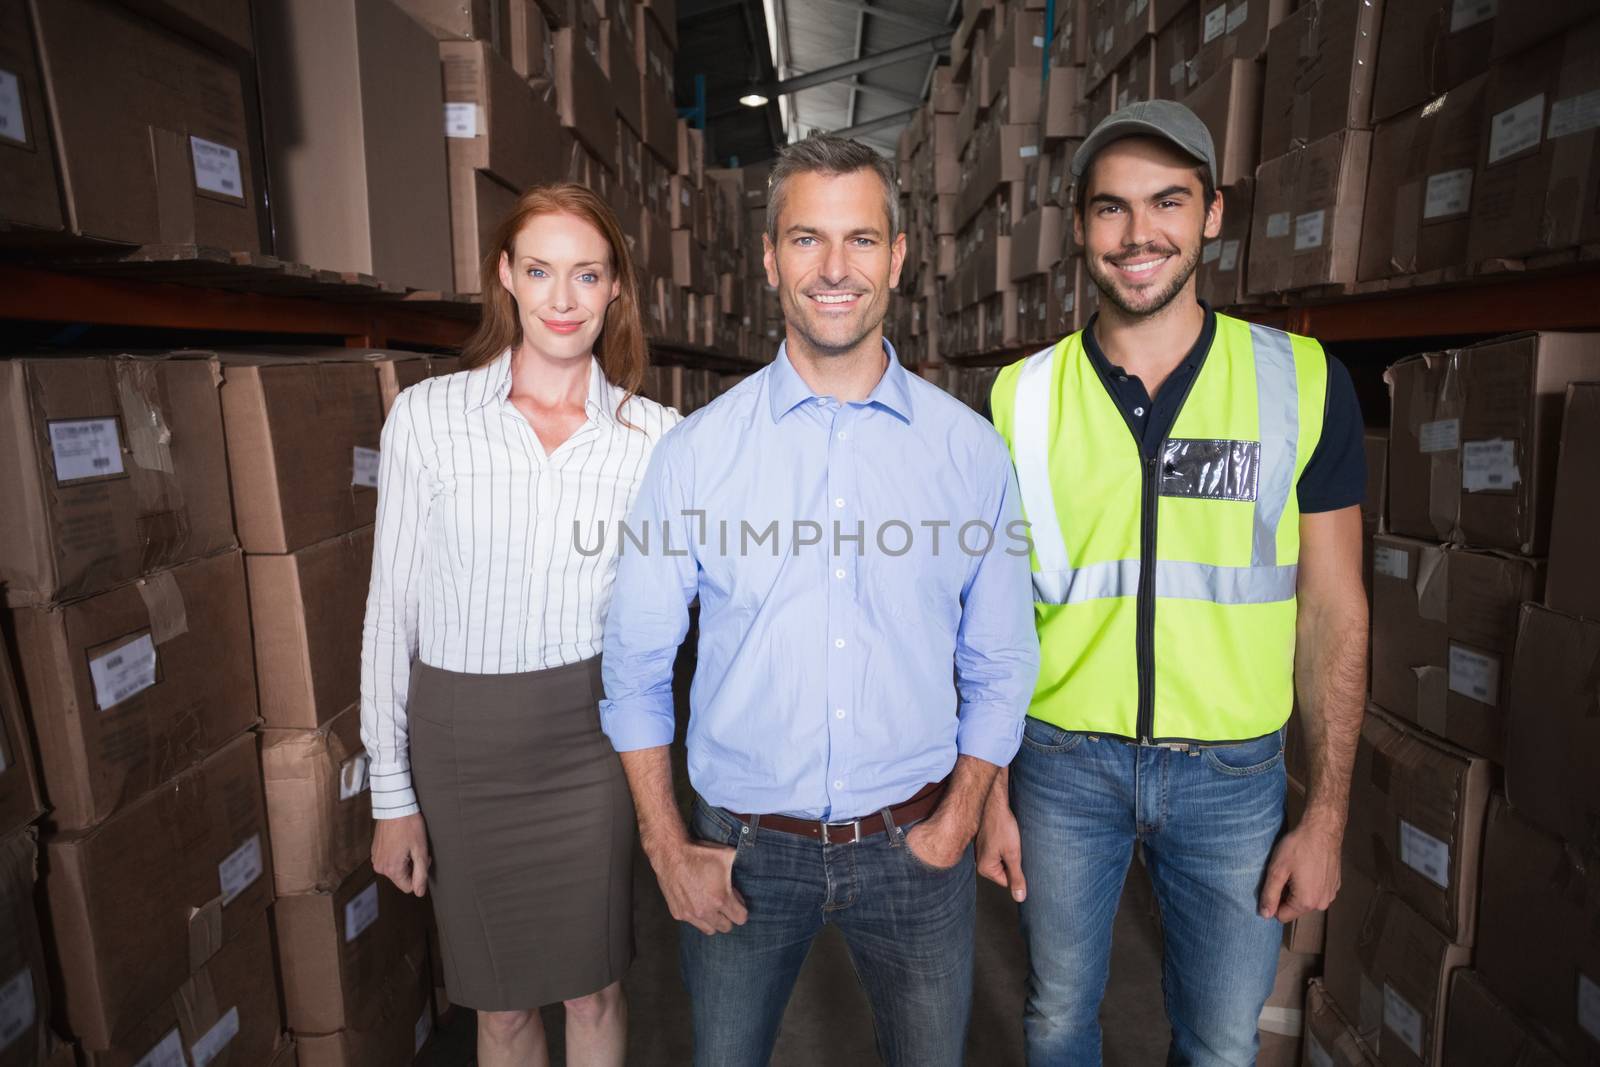 Warehouse team smiling at camera in a large warehouse